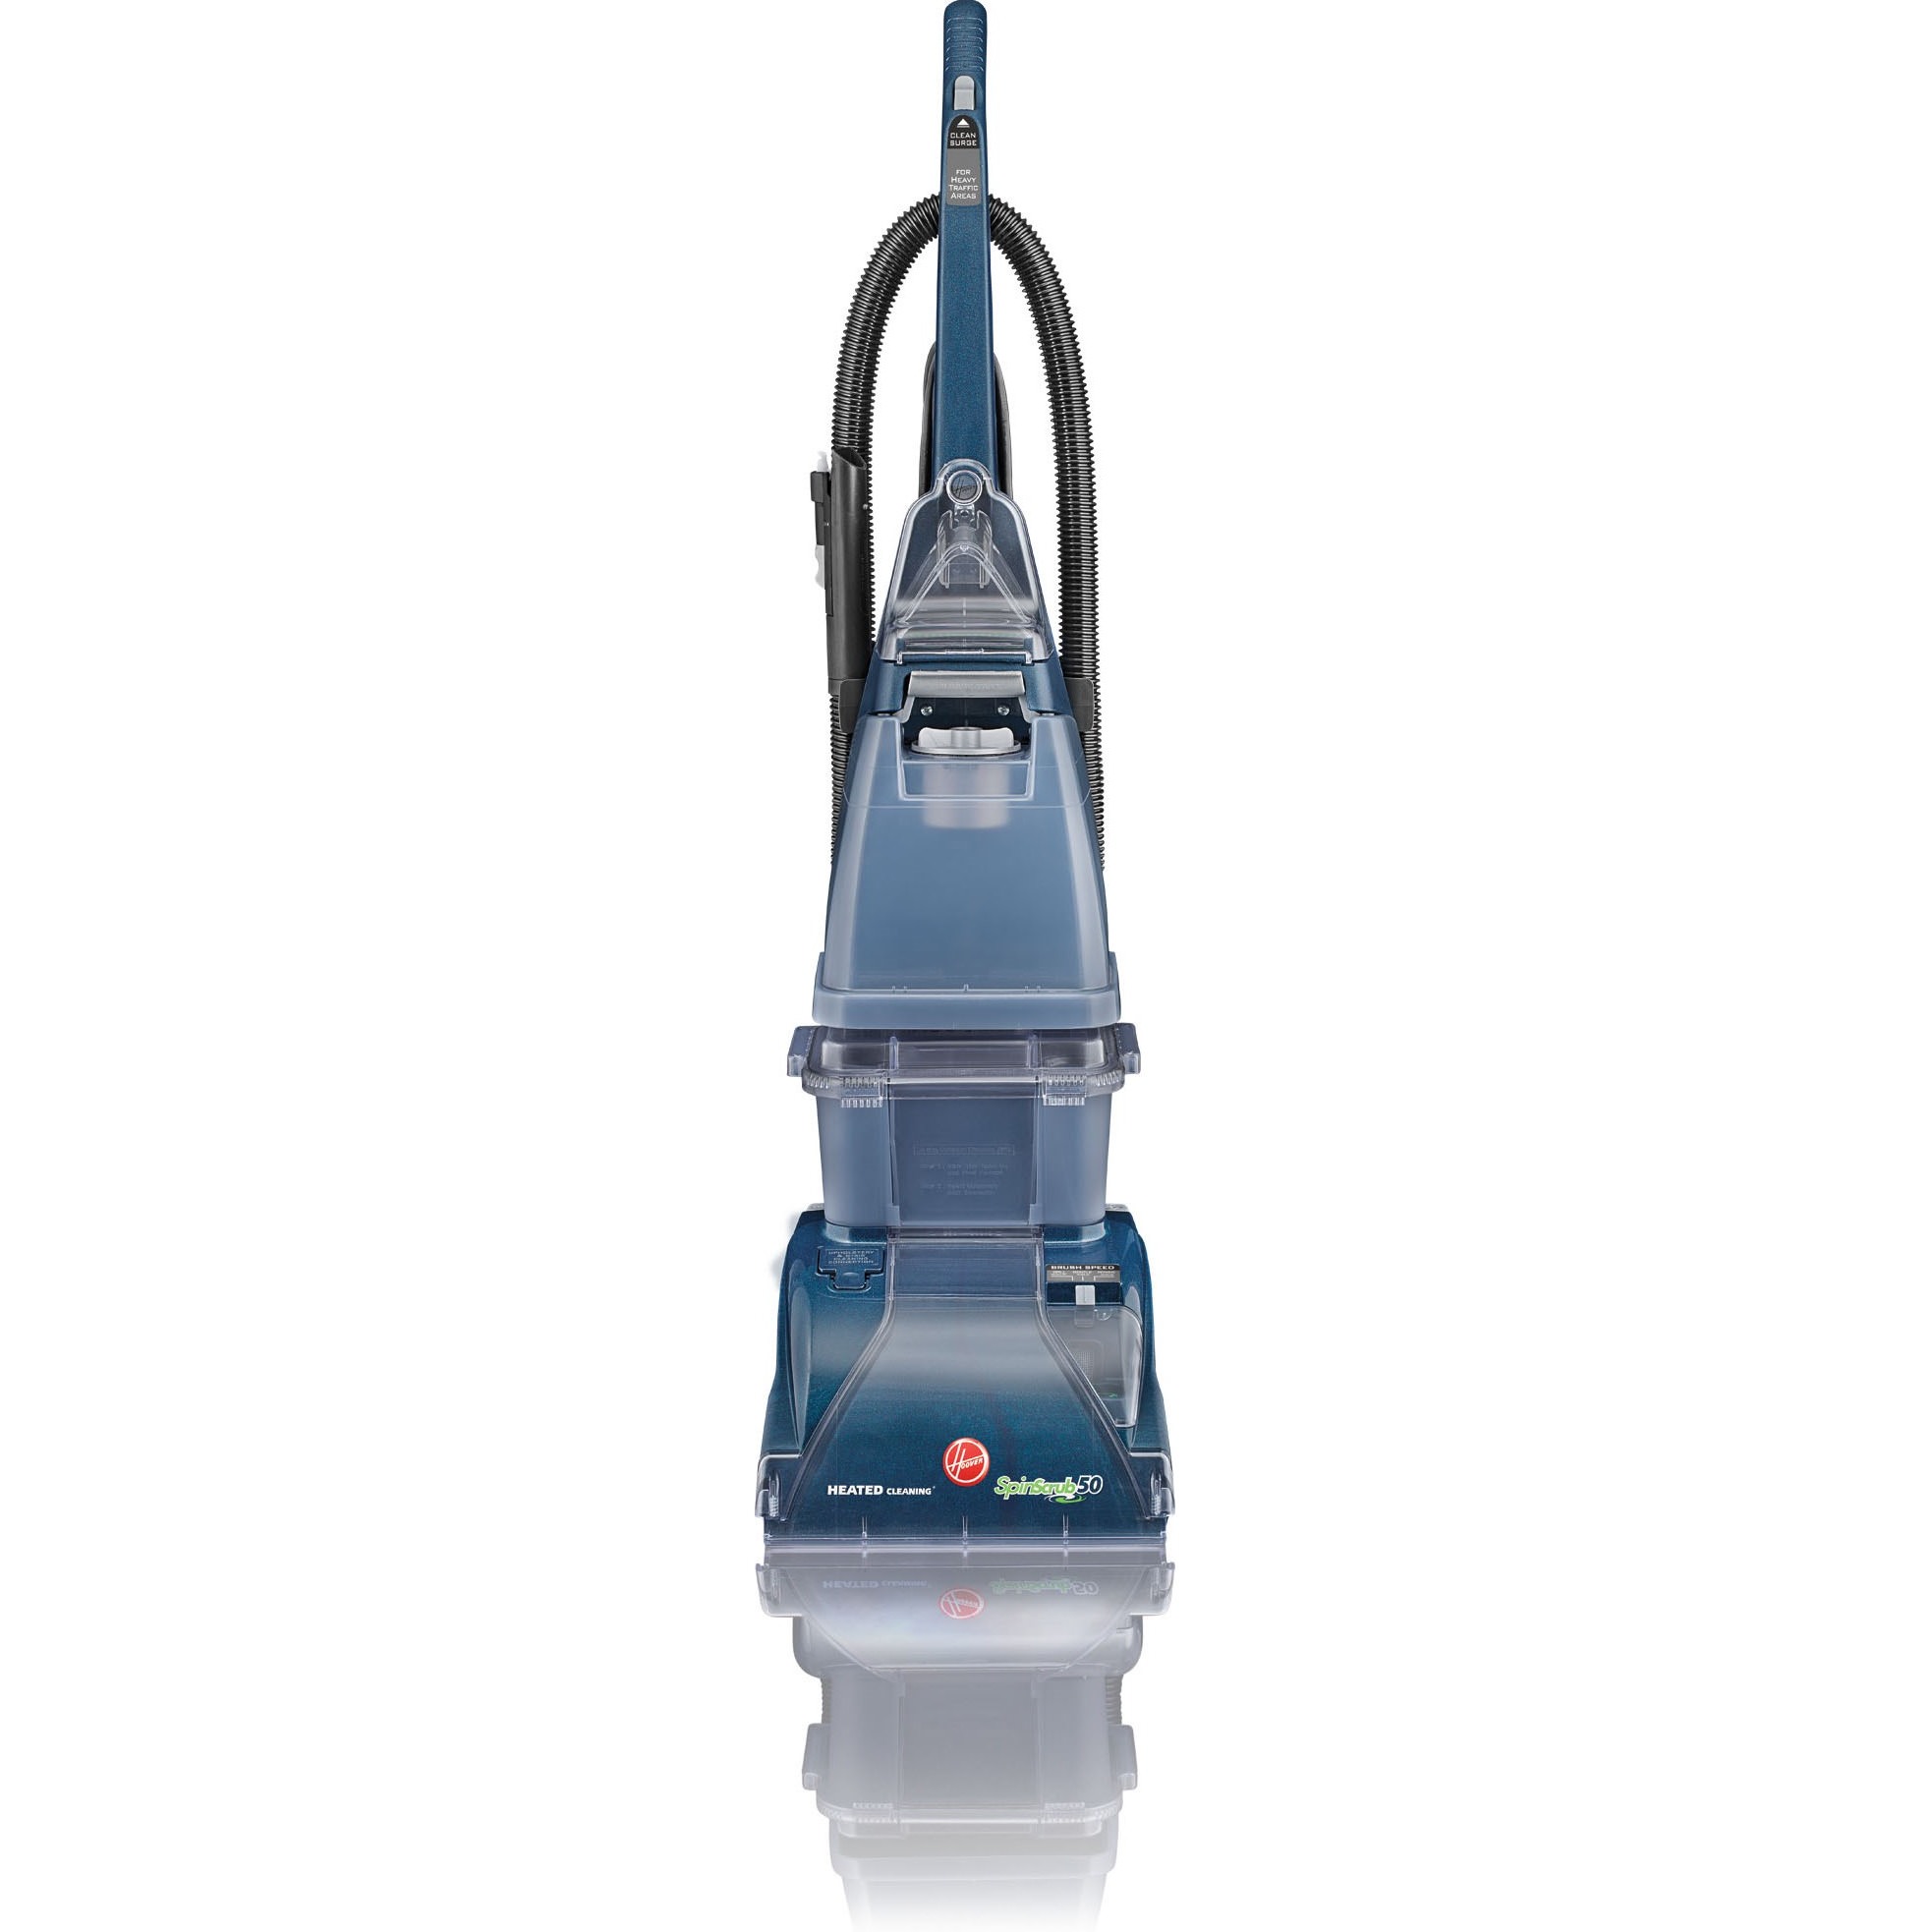 Hoover SteamVac SpinScrub with CleanSurge Carpet Cleaner, F5915905 - image 5 of 5